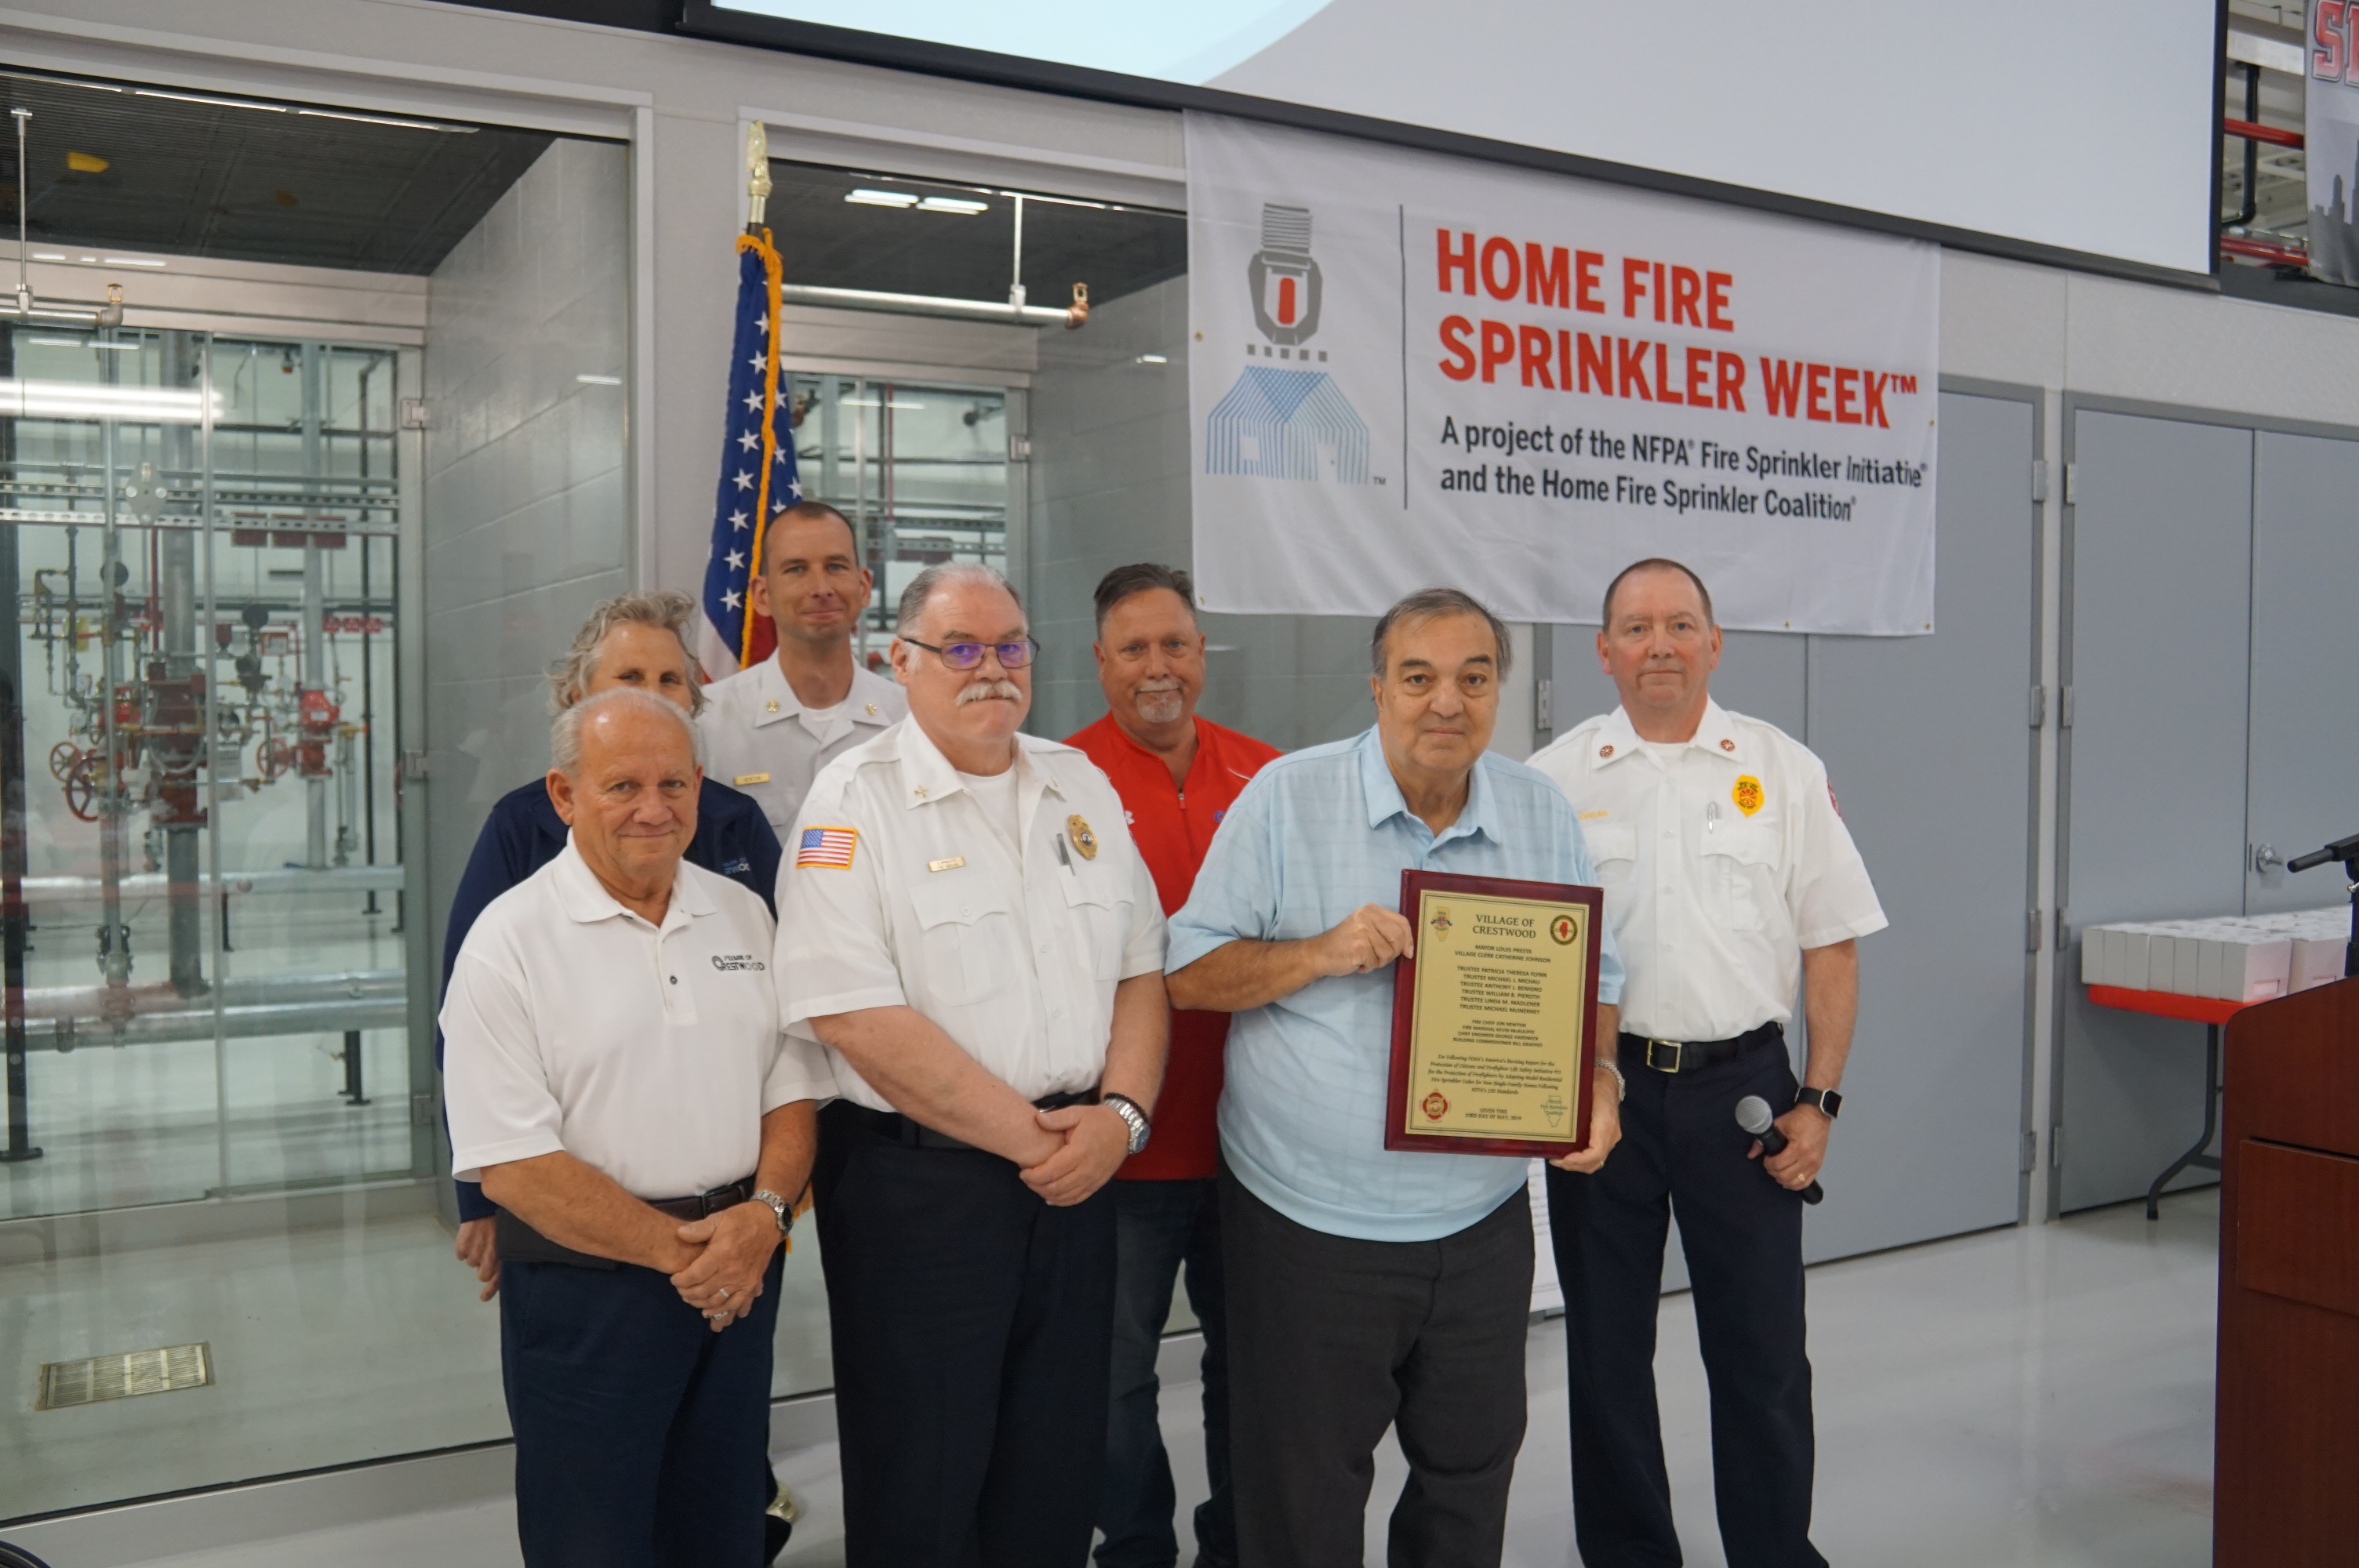 Crestwood Fire District recognition award presented to the Mayor Louis Presta, Fire Marshal Kevin McAuliffe, Village Trustees and Building Commissioner by Fire Marshal Dan Riordan of the Tinley Park FD.